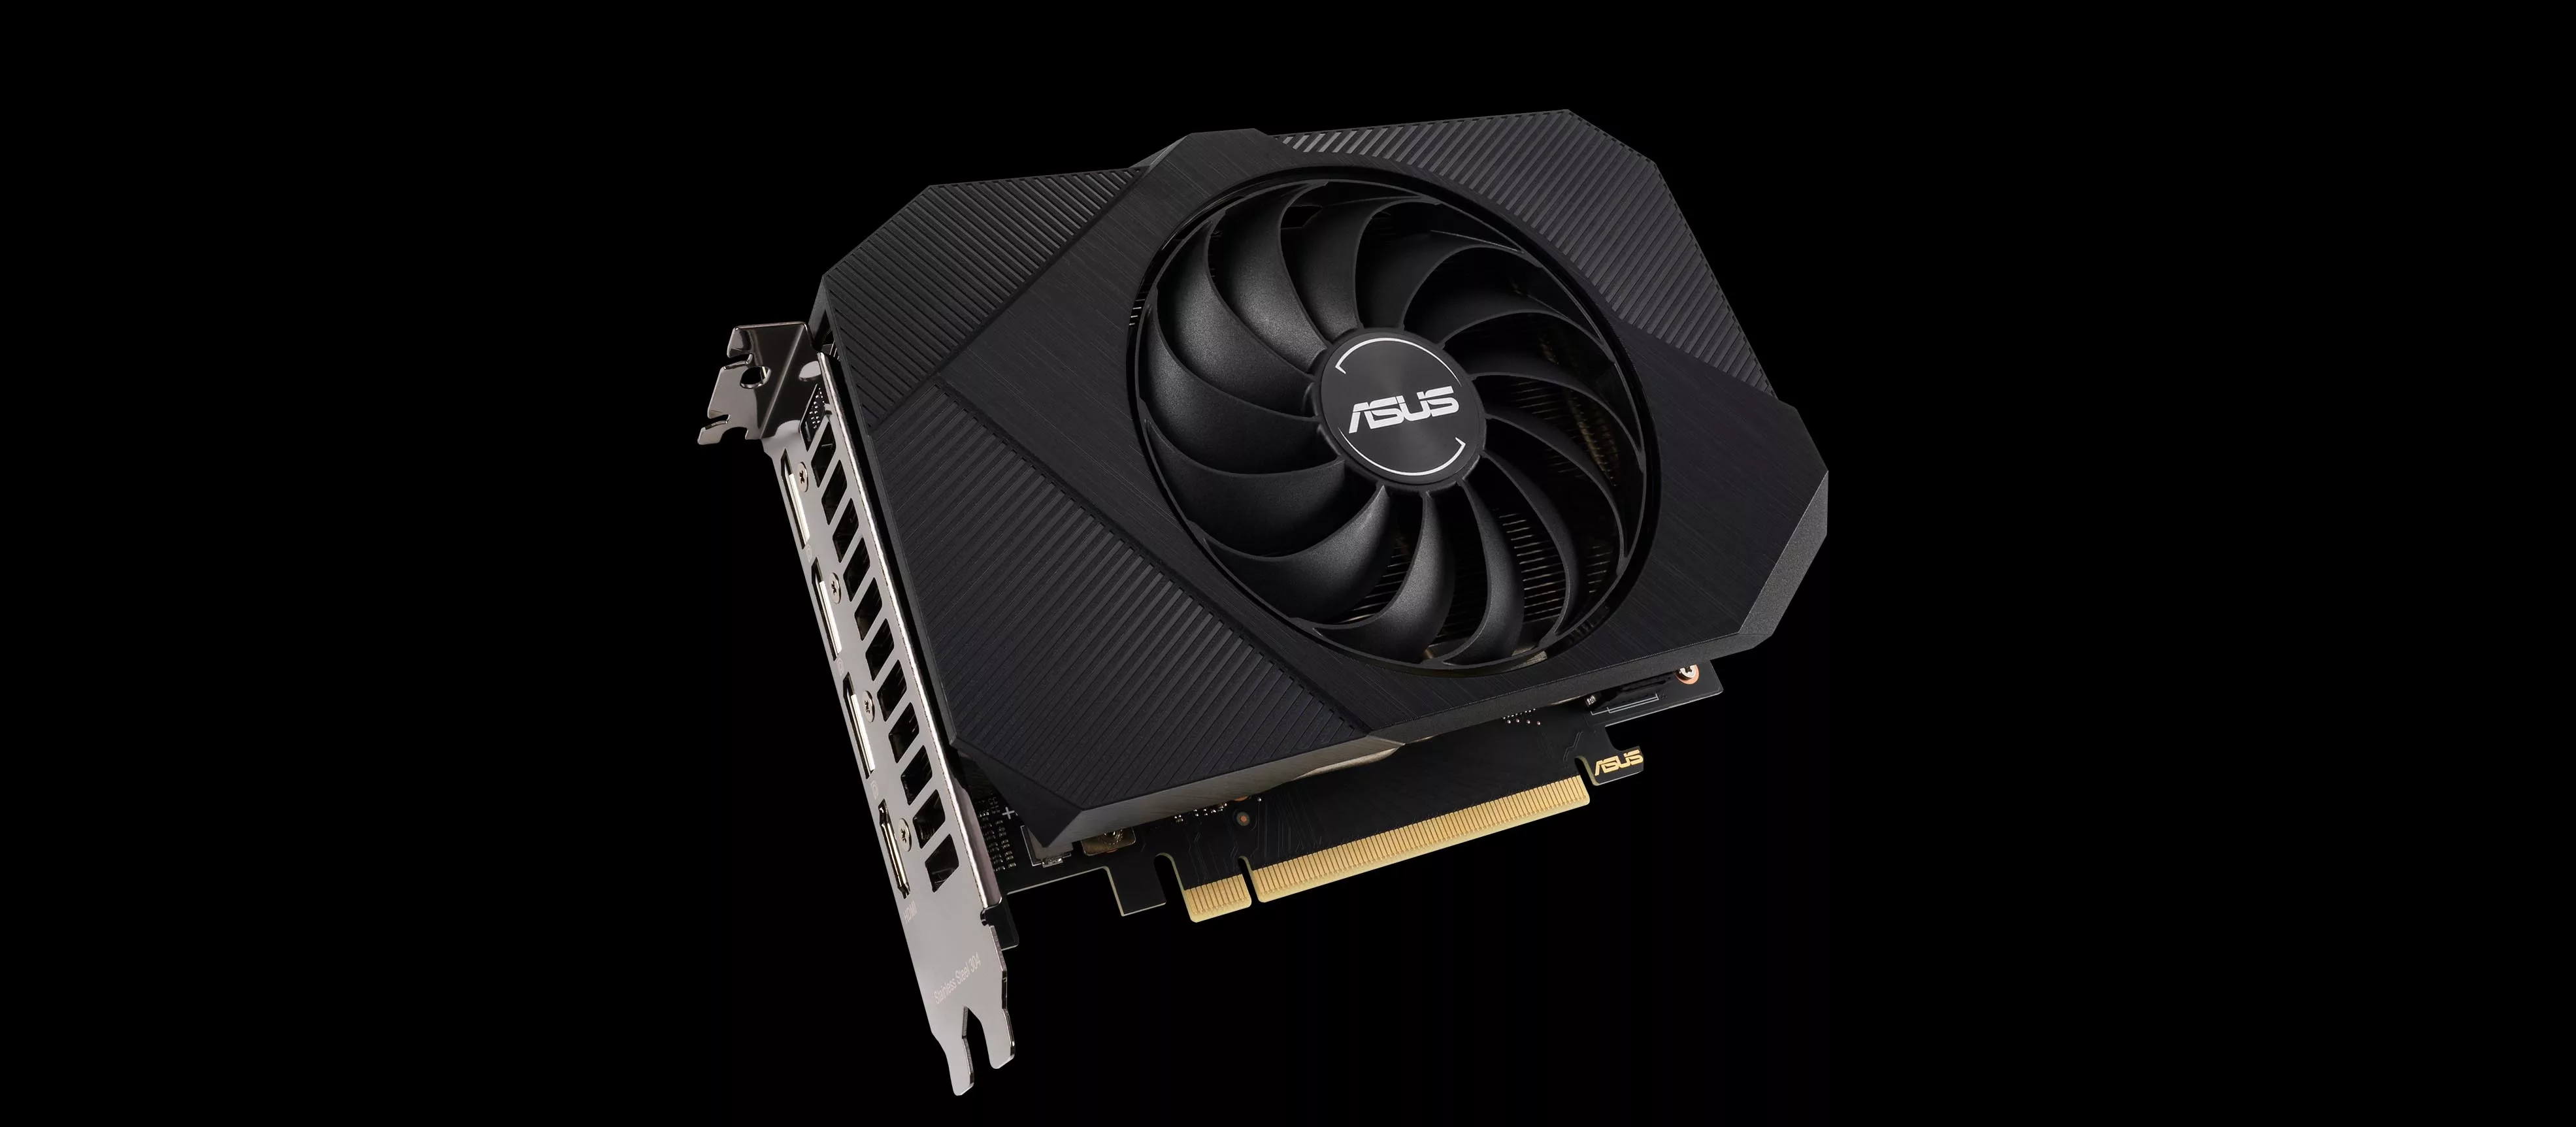 An image of a single-fan ASUS Phoenix RTX 3060 graphics card on a black background.